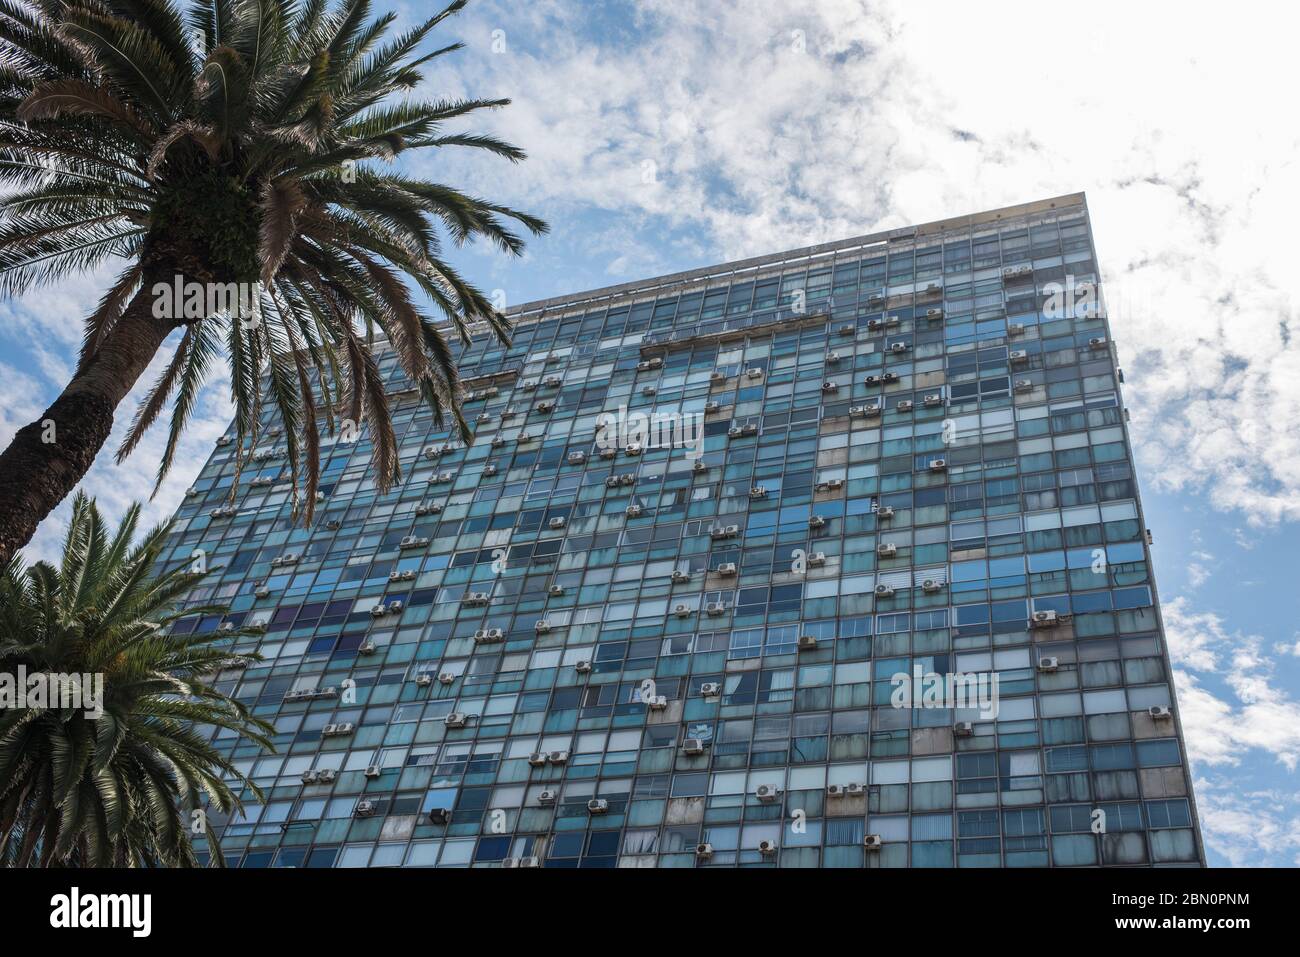 Montevideo / Uruguay, Dec 29, 2018: exterior view of a glazed building with many air conditioner machines hanged, palms and a sunny sky Stock Photo